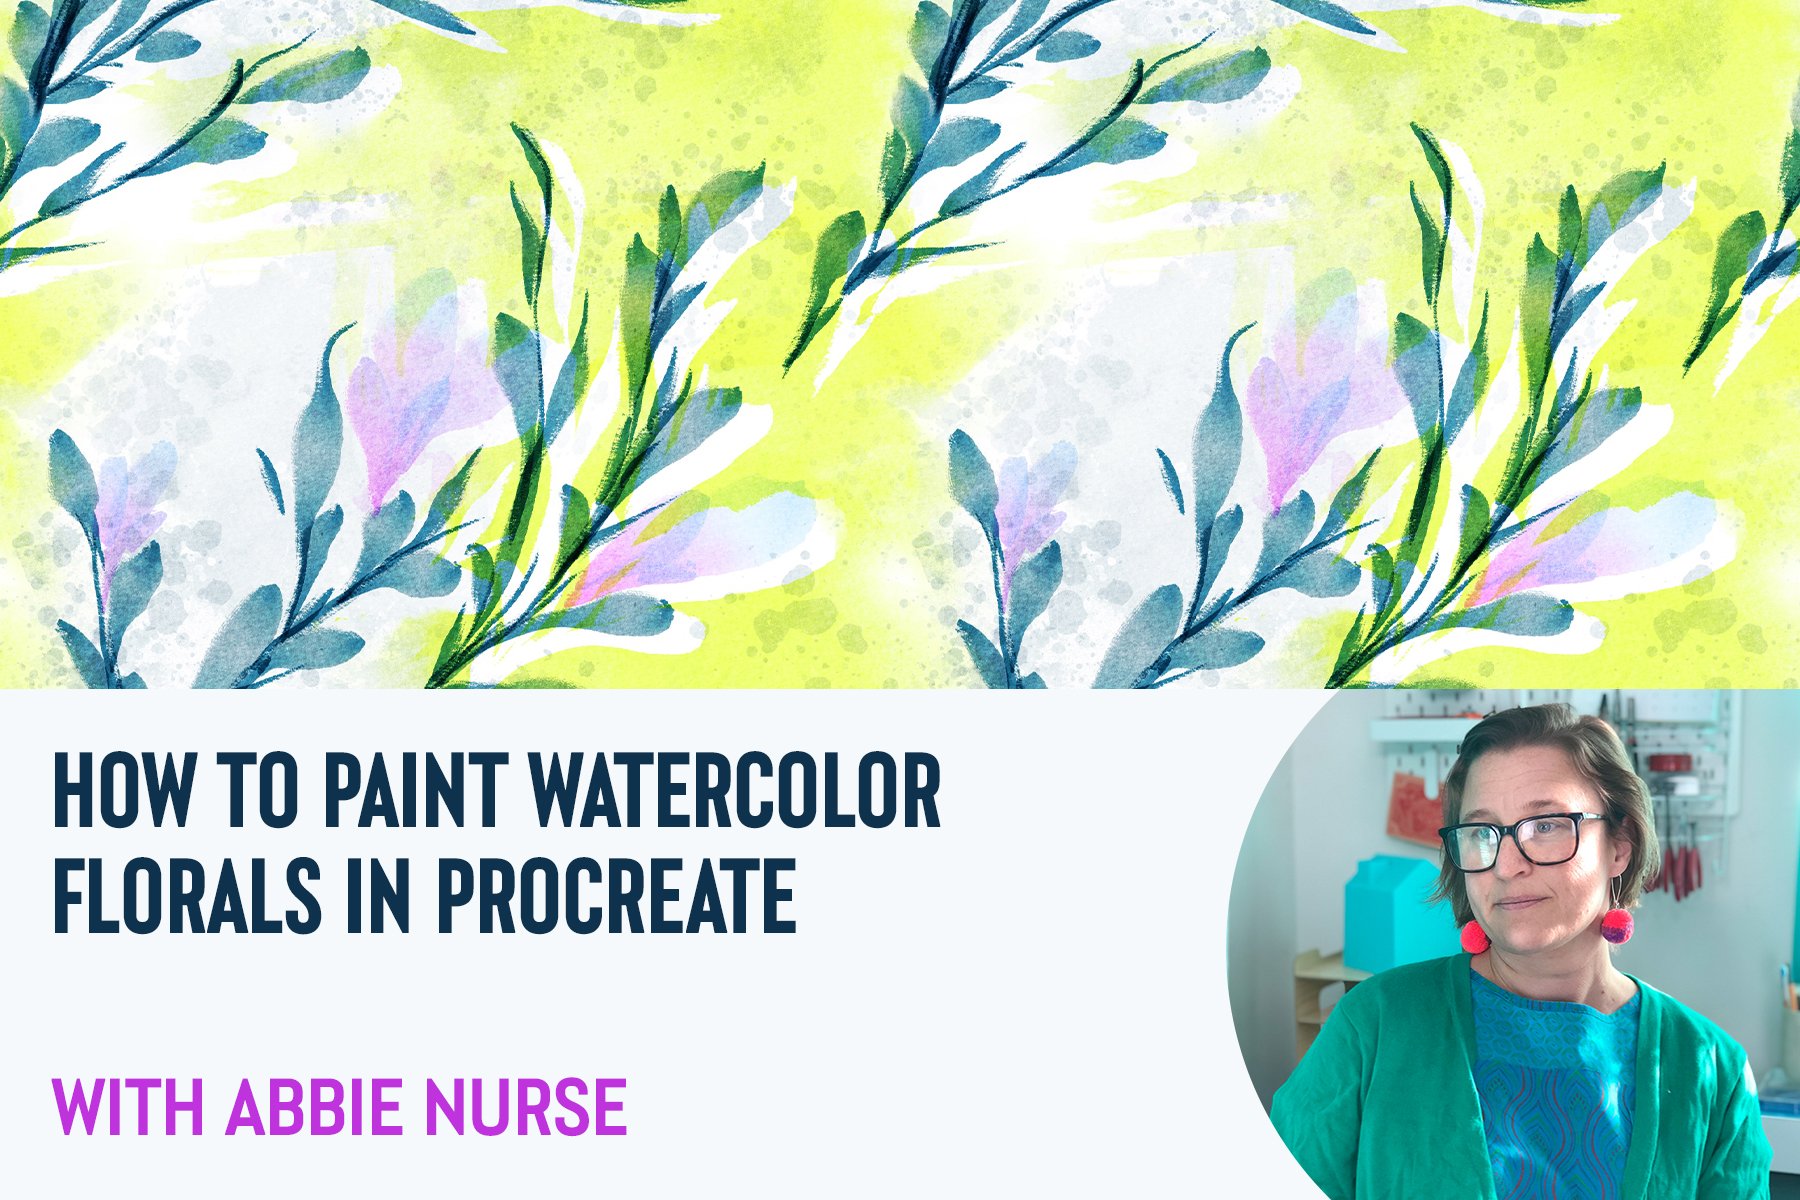 How to Paint Watercolor Florals in Procreate With Abbie Nurse